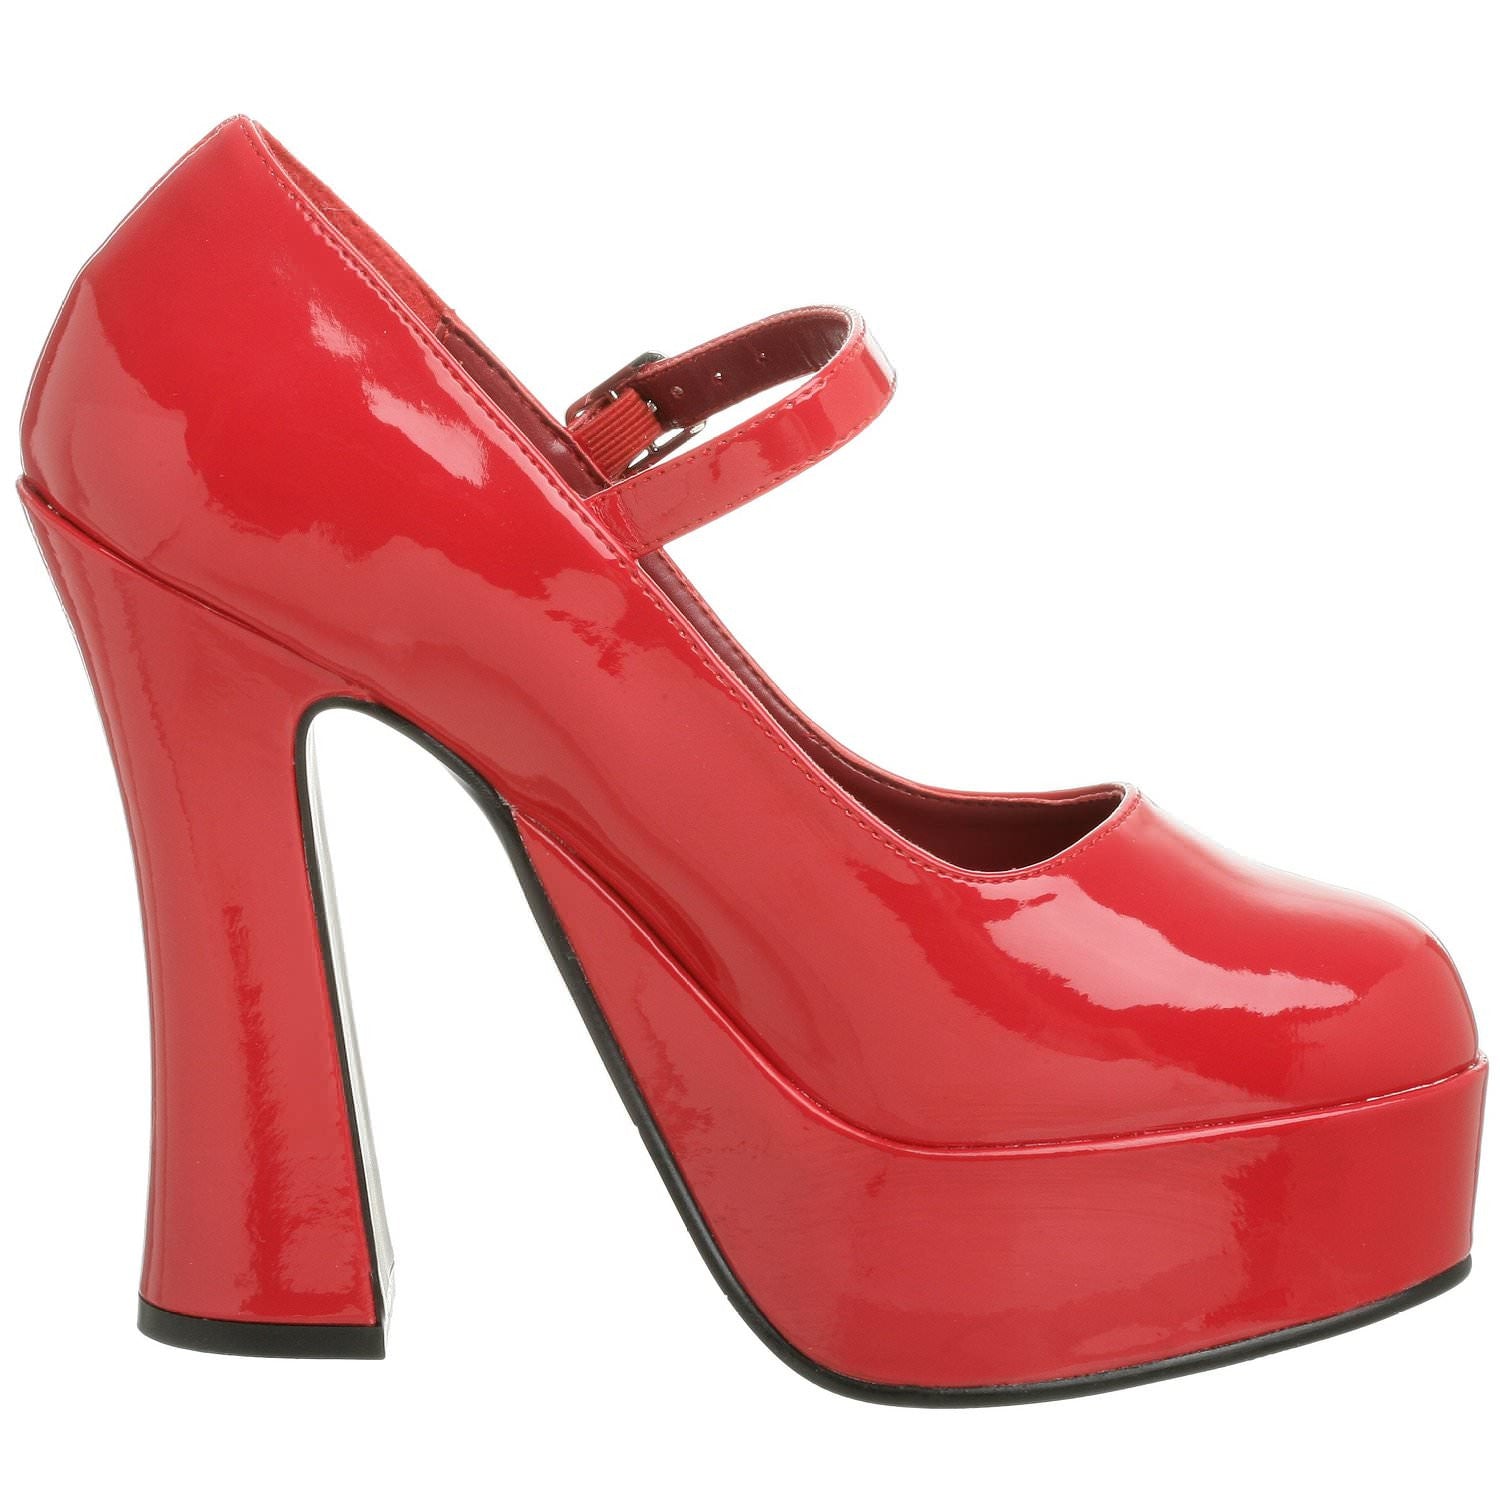 DEMONIA DOLLY-50 Red Pat Mary Jane Pumps - Shoecup.com - 5